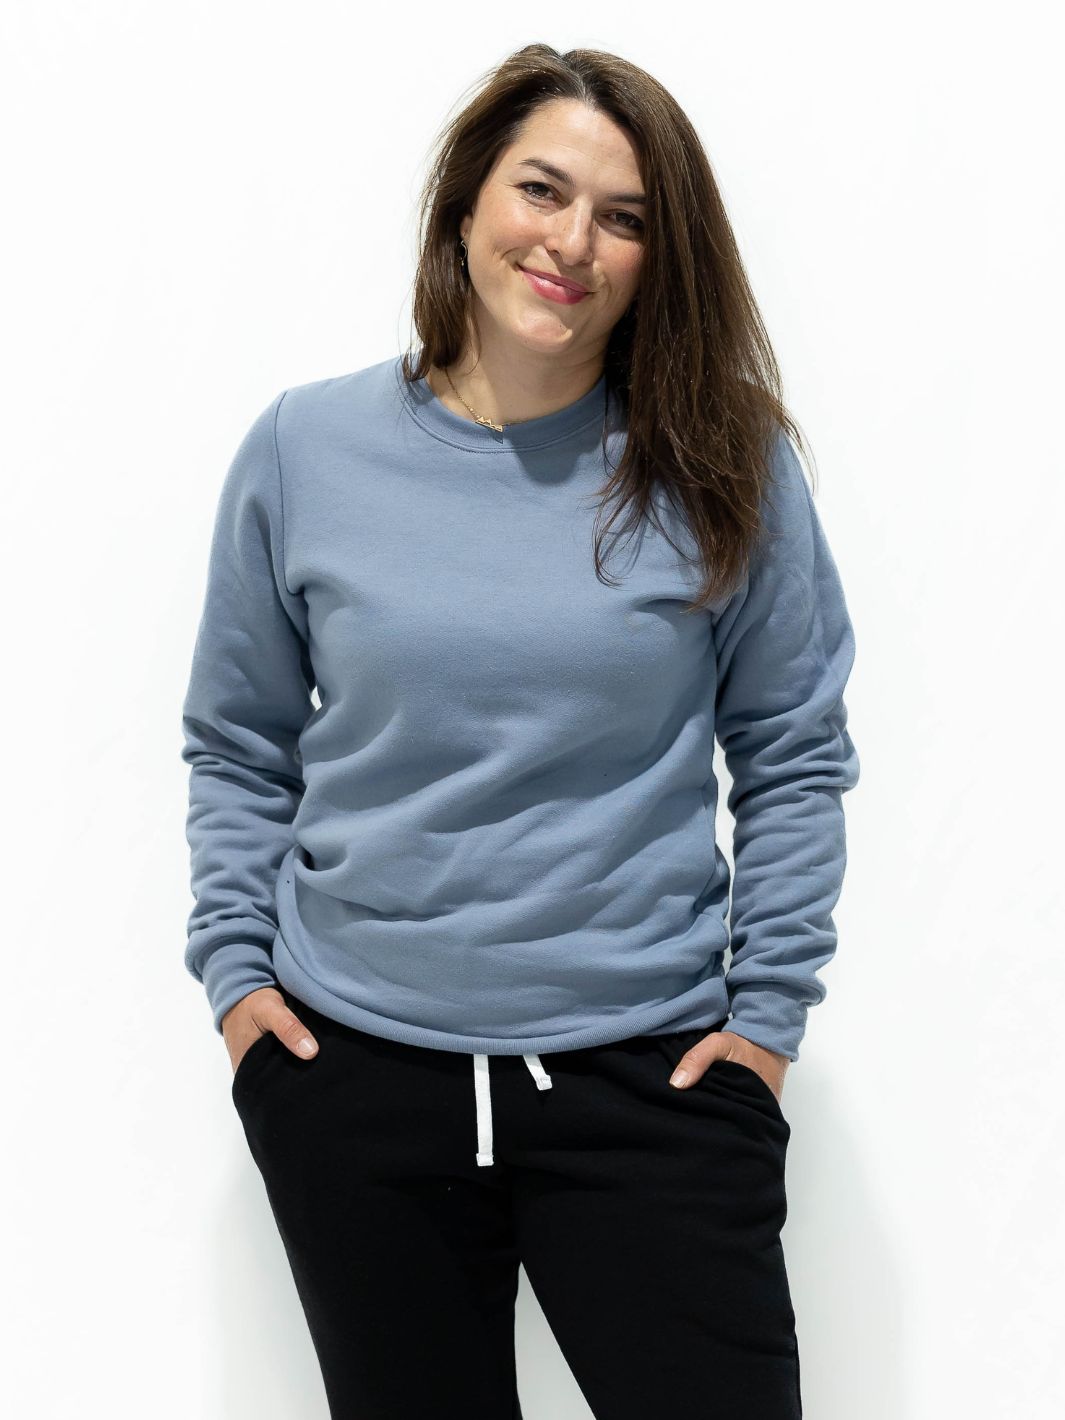 Individual wearing a Local Laundry limited sweater in powder blue. Sustainable fashion - Made in Canada